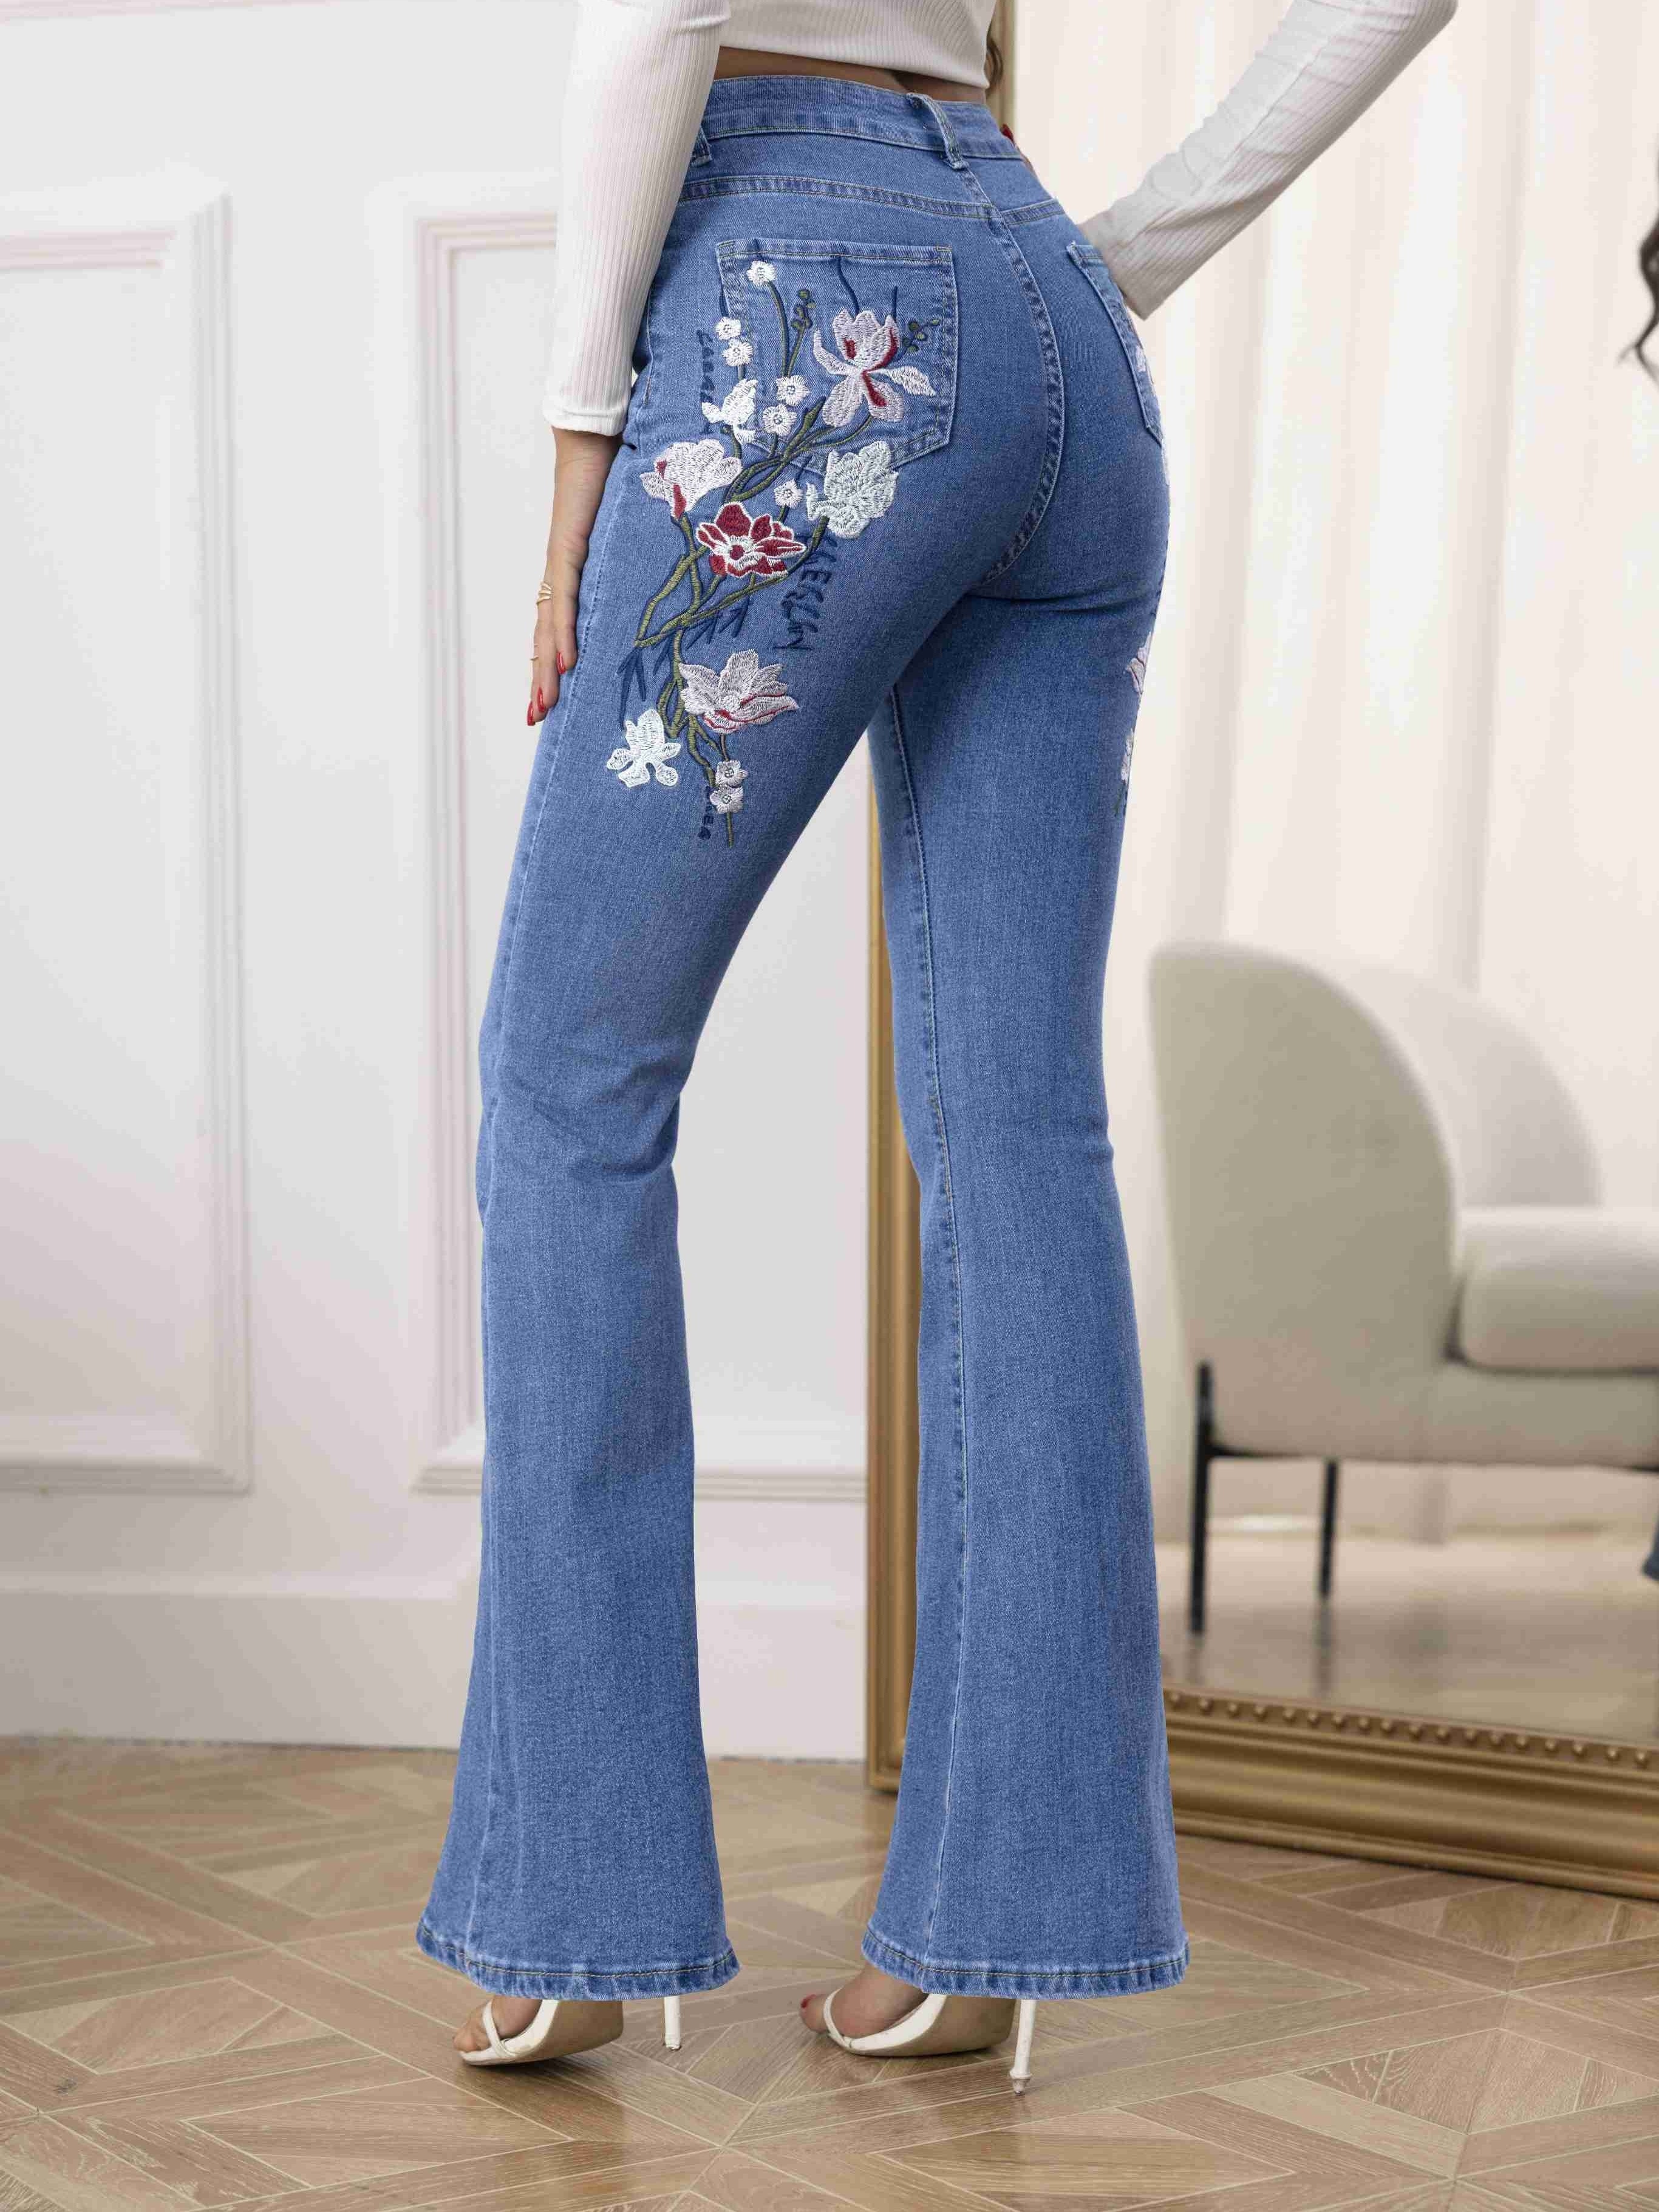 Bell Bottom Jeans for Women, Women's Floral Embroidered High Rise